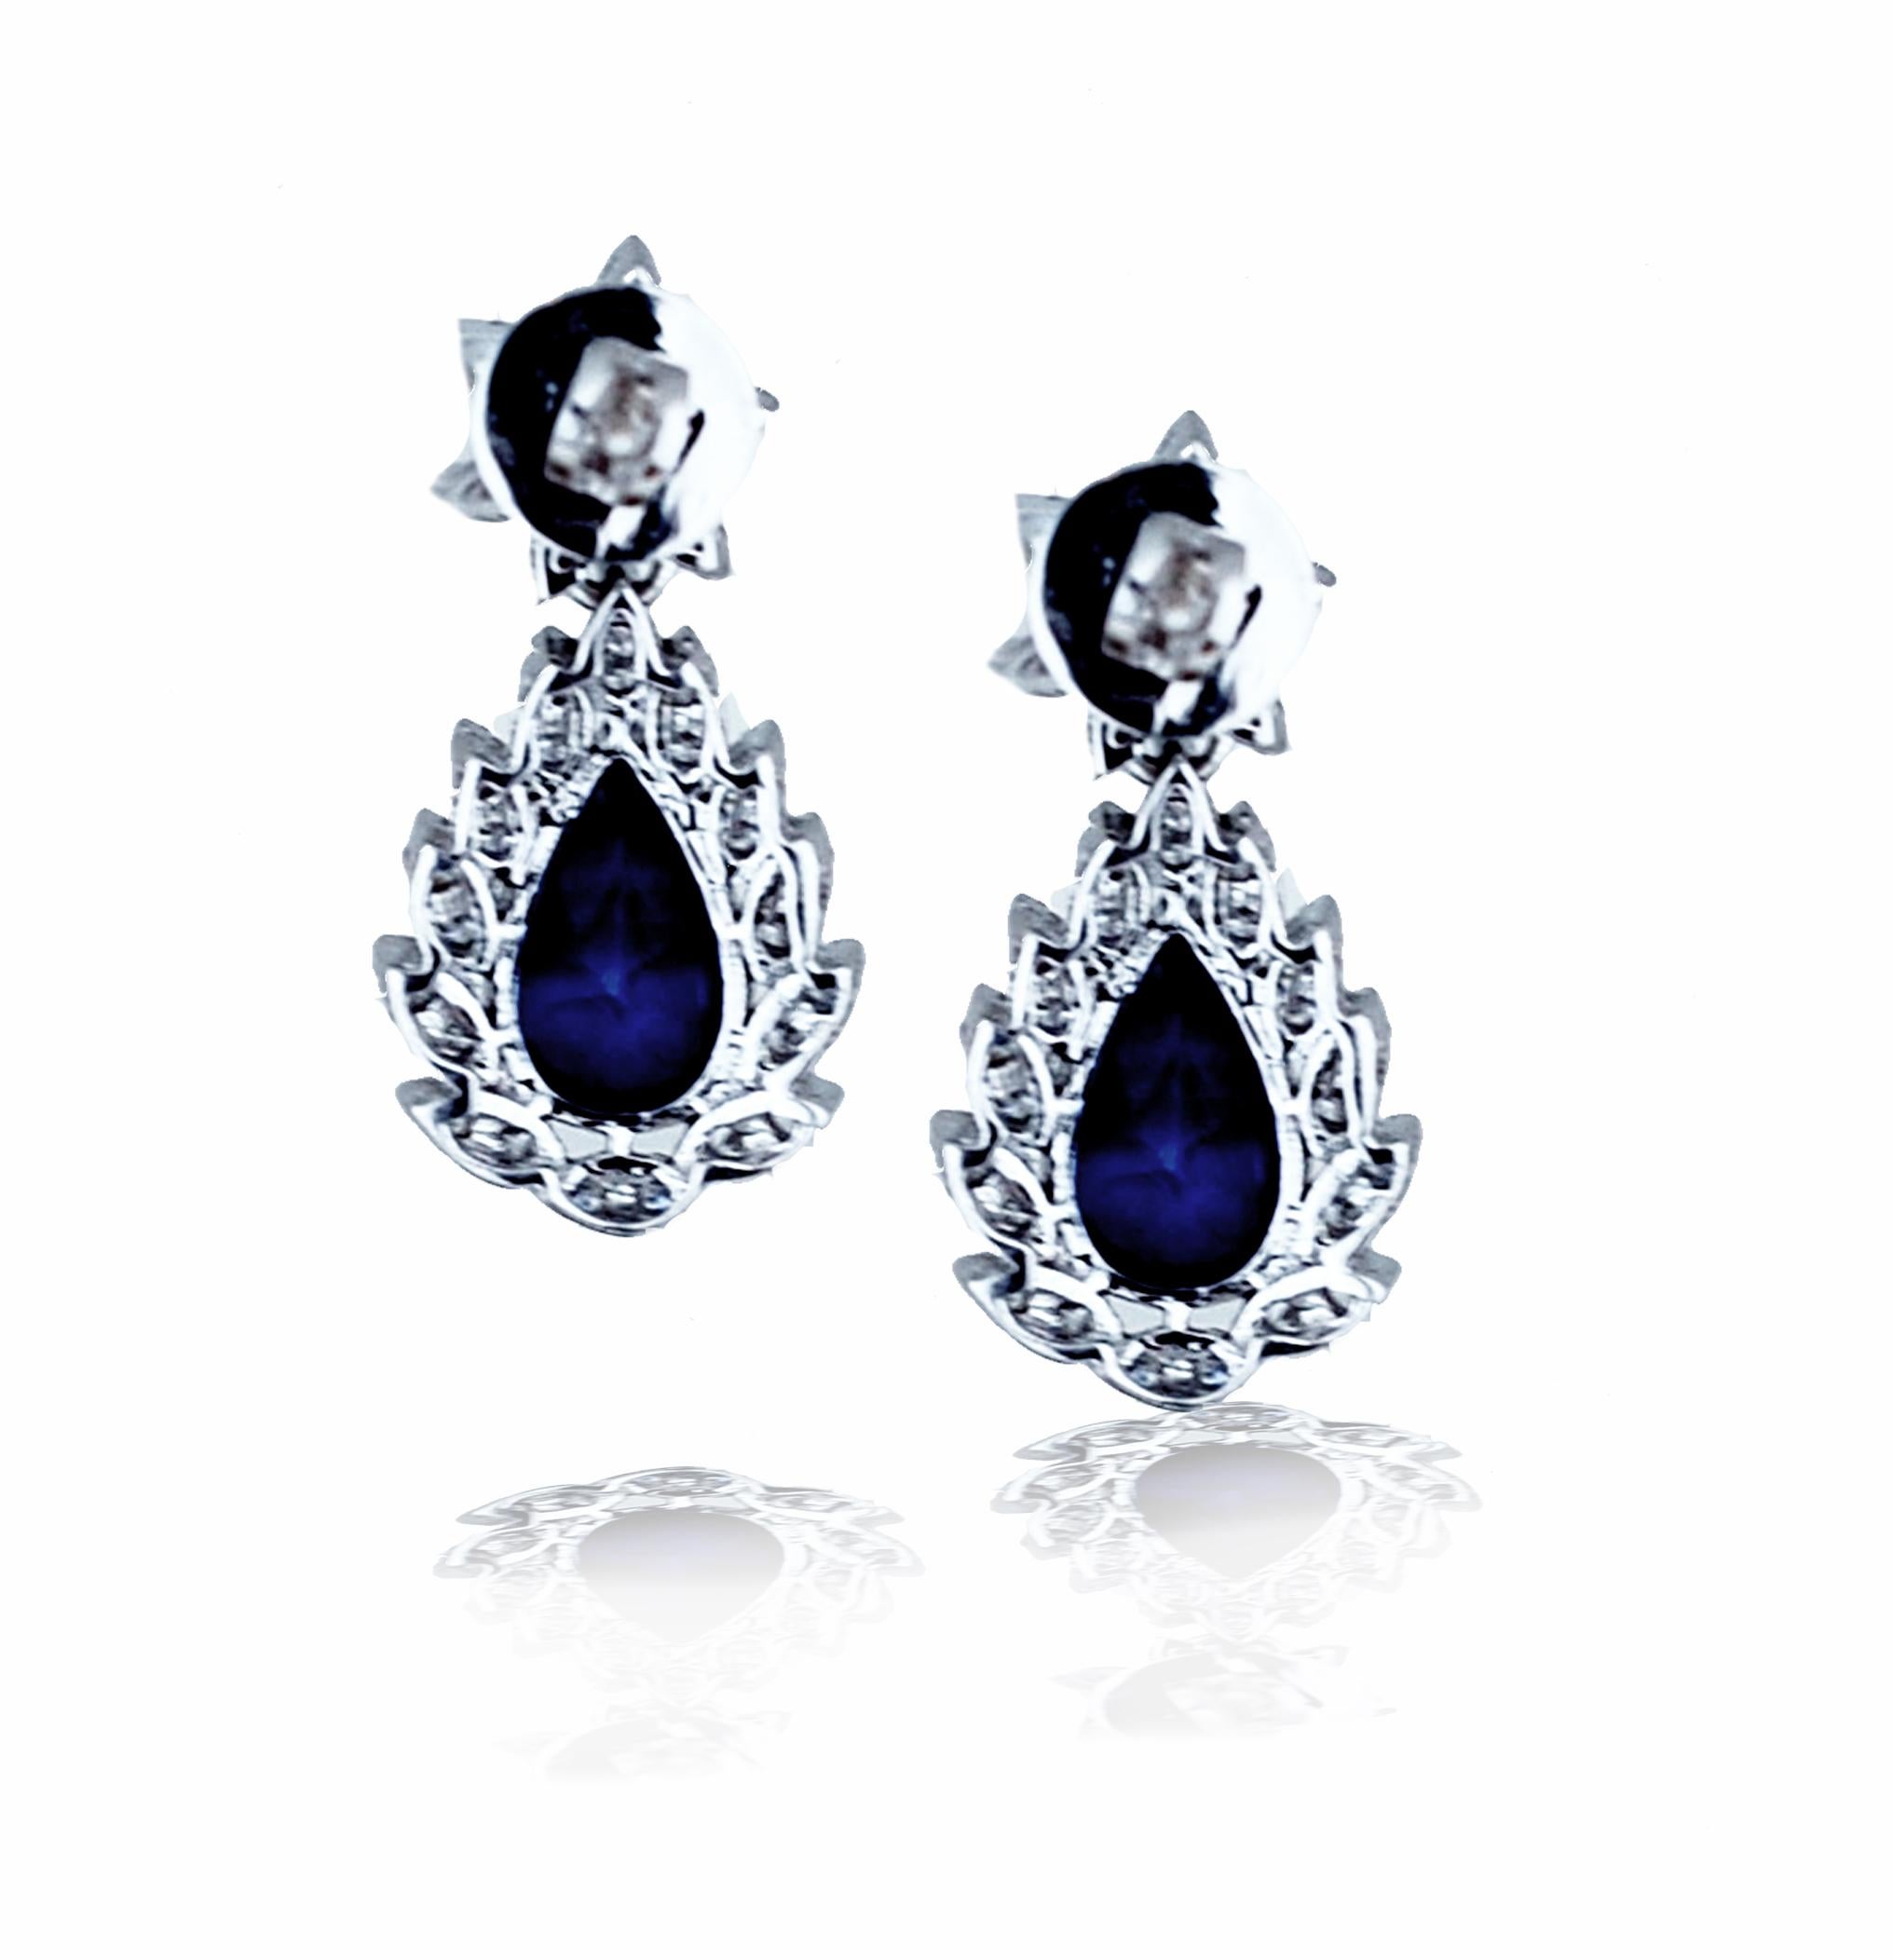 A pair of rich deep blue sapphire and diamond earrings can be appreciated by most.  This pair has a wonderful balance of deep blue sapphires contrasted with bright white diamonds.  The sapphires are mounted in a prong head setting and have diamond